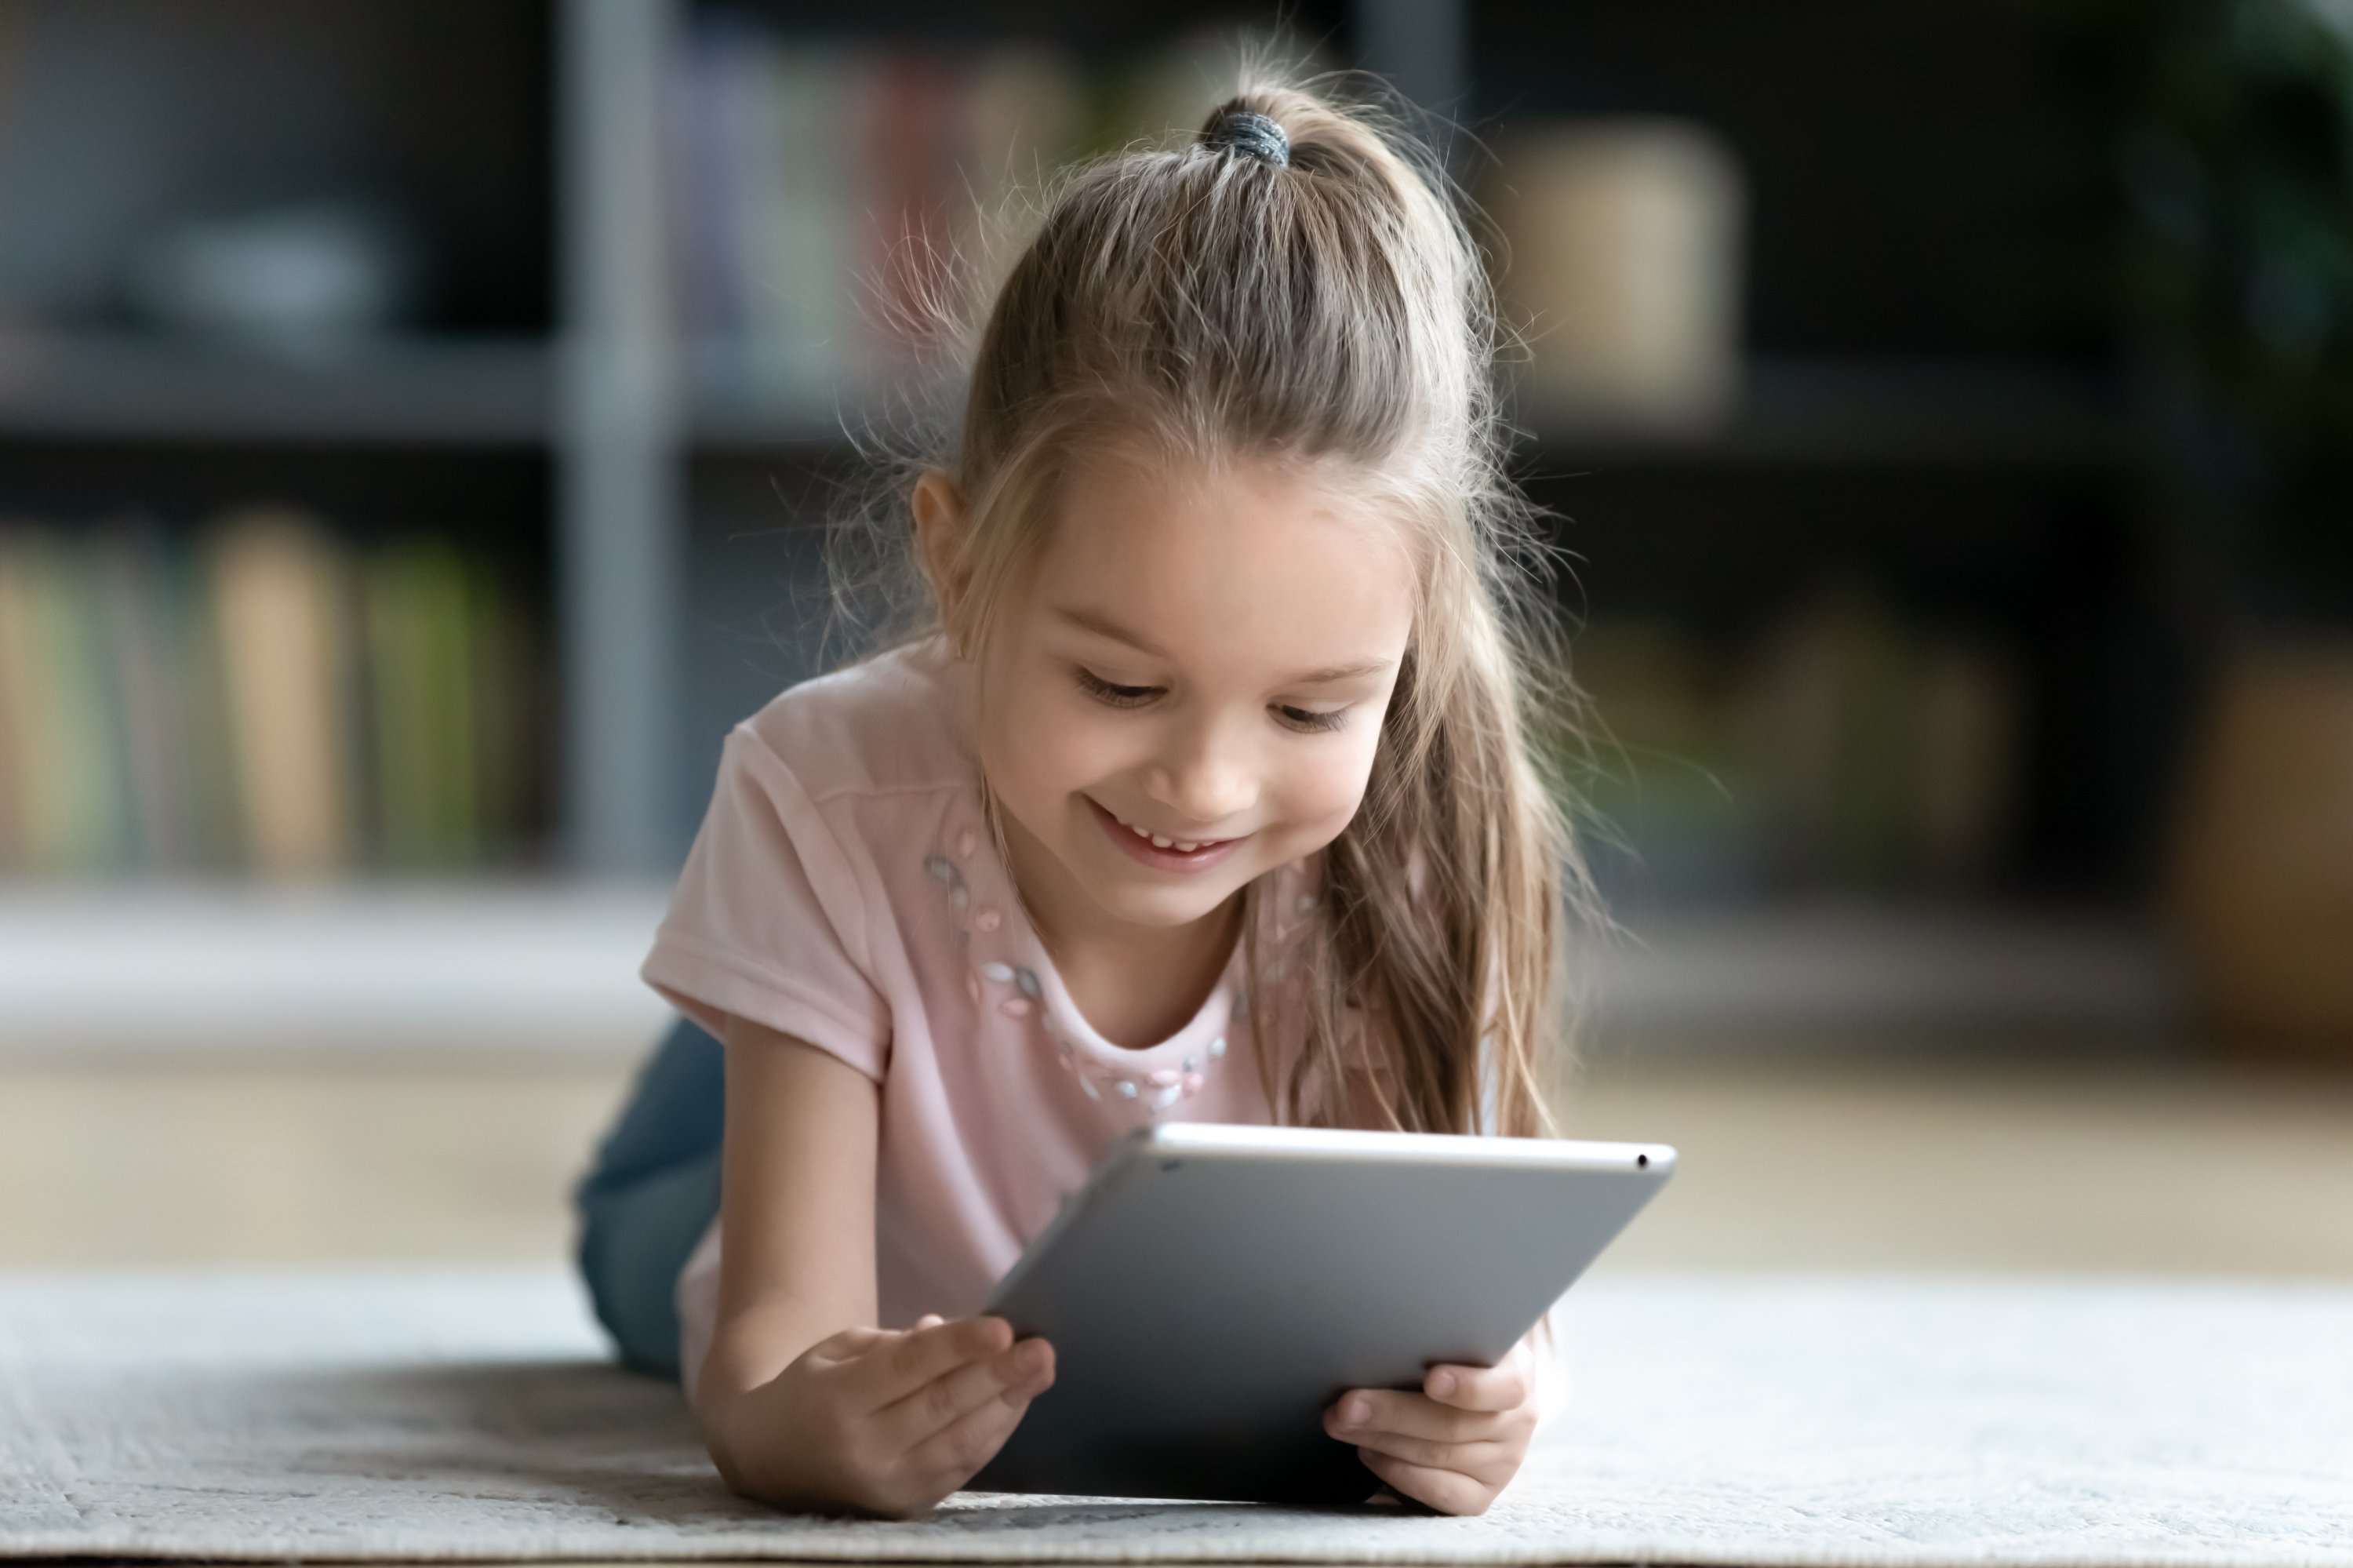 Your child wants a tablet, here's what to know